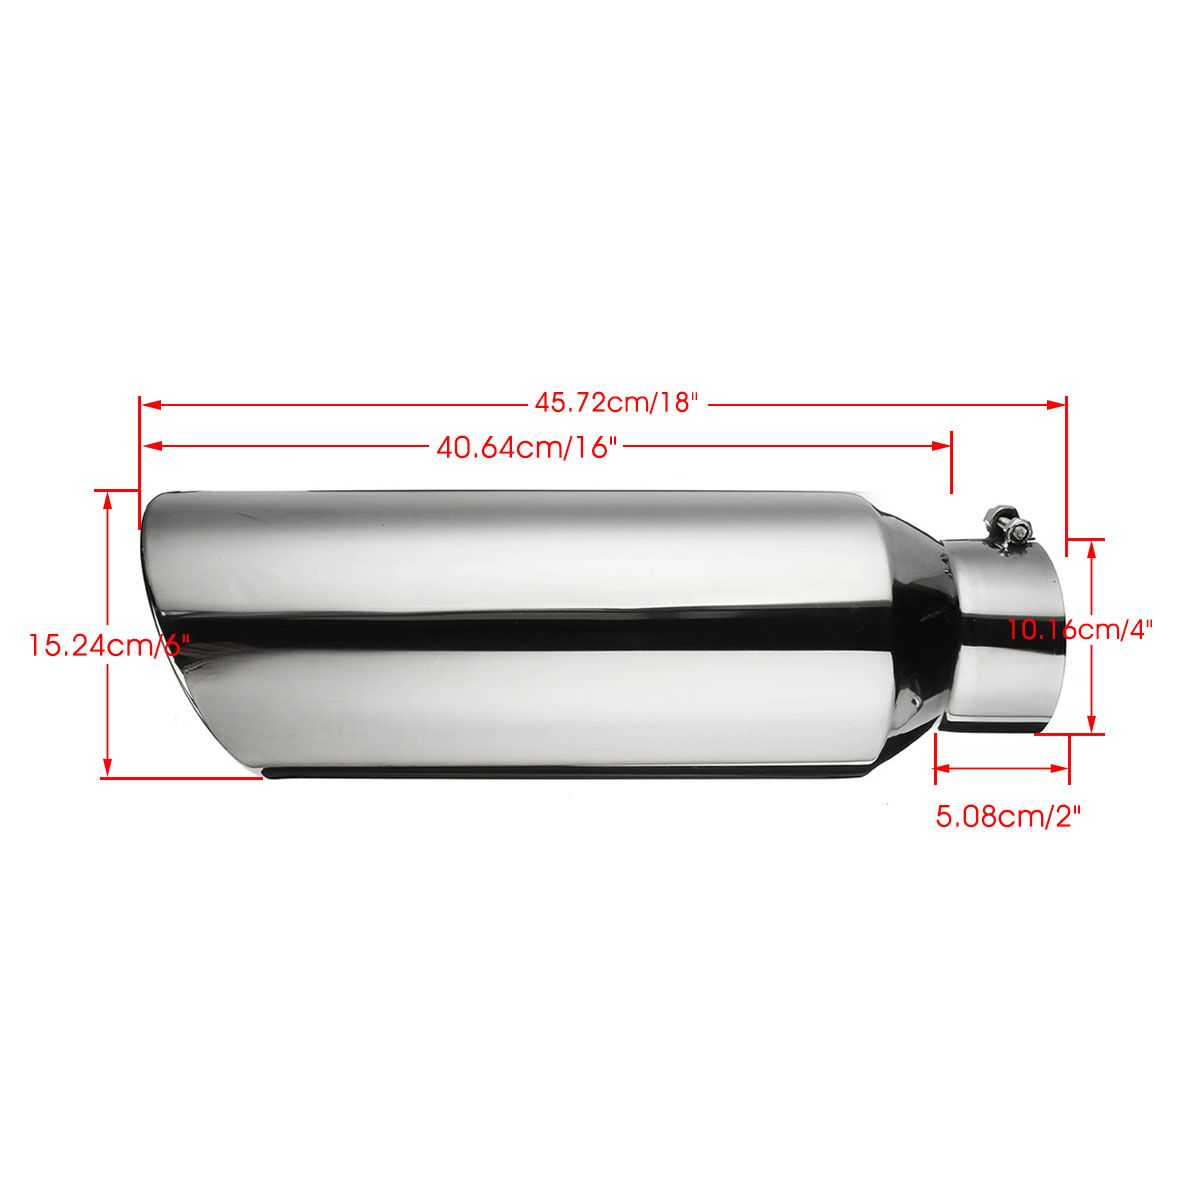 4-Inlet-6-Outlet-Stainless-Tail-Exhaust-Tip-Muffler-Pipe-Bolt-On-18-Long-Exhaust-Tip-1555751